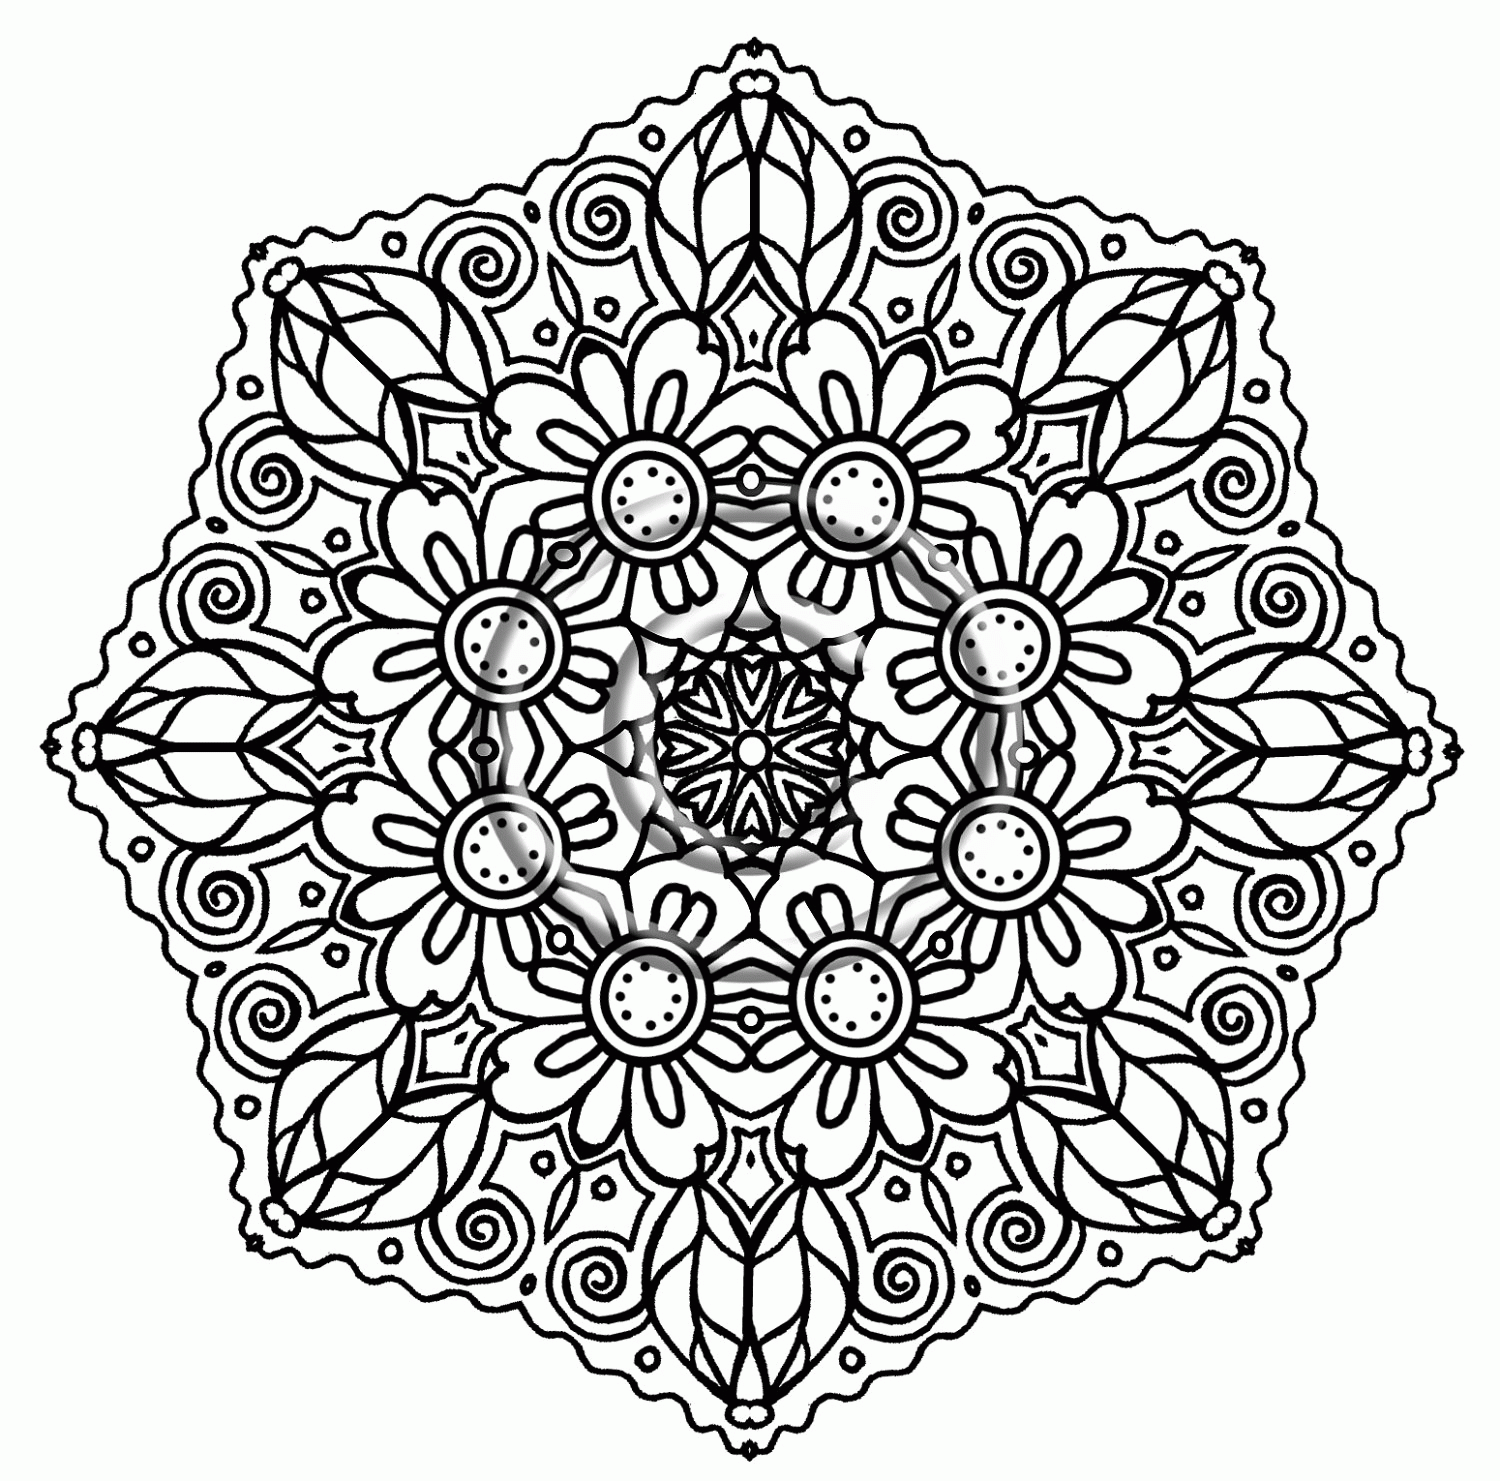 Intricate coloring pages for adults to download and print for free